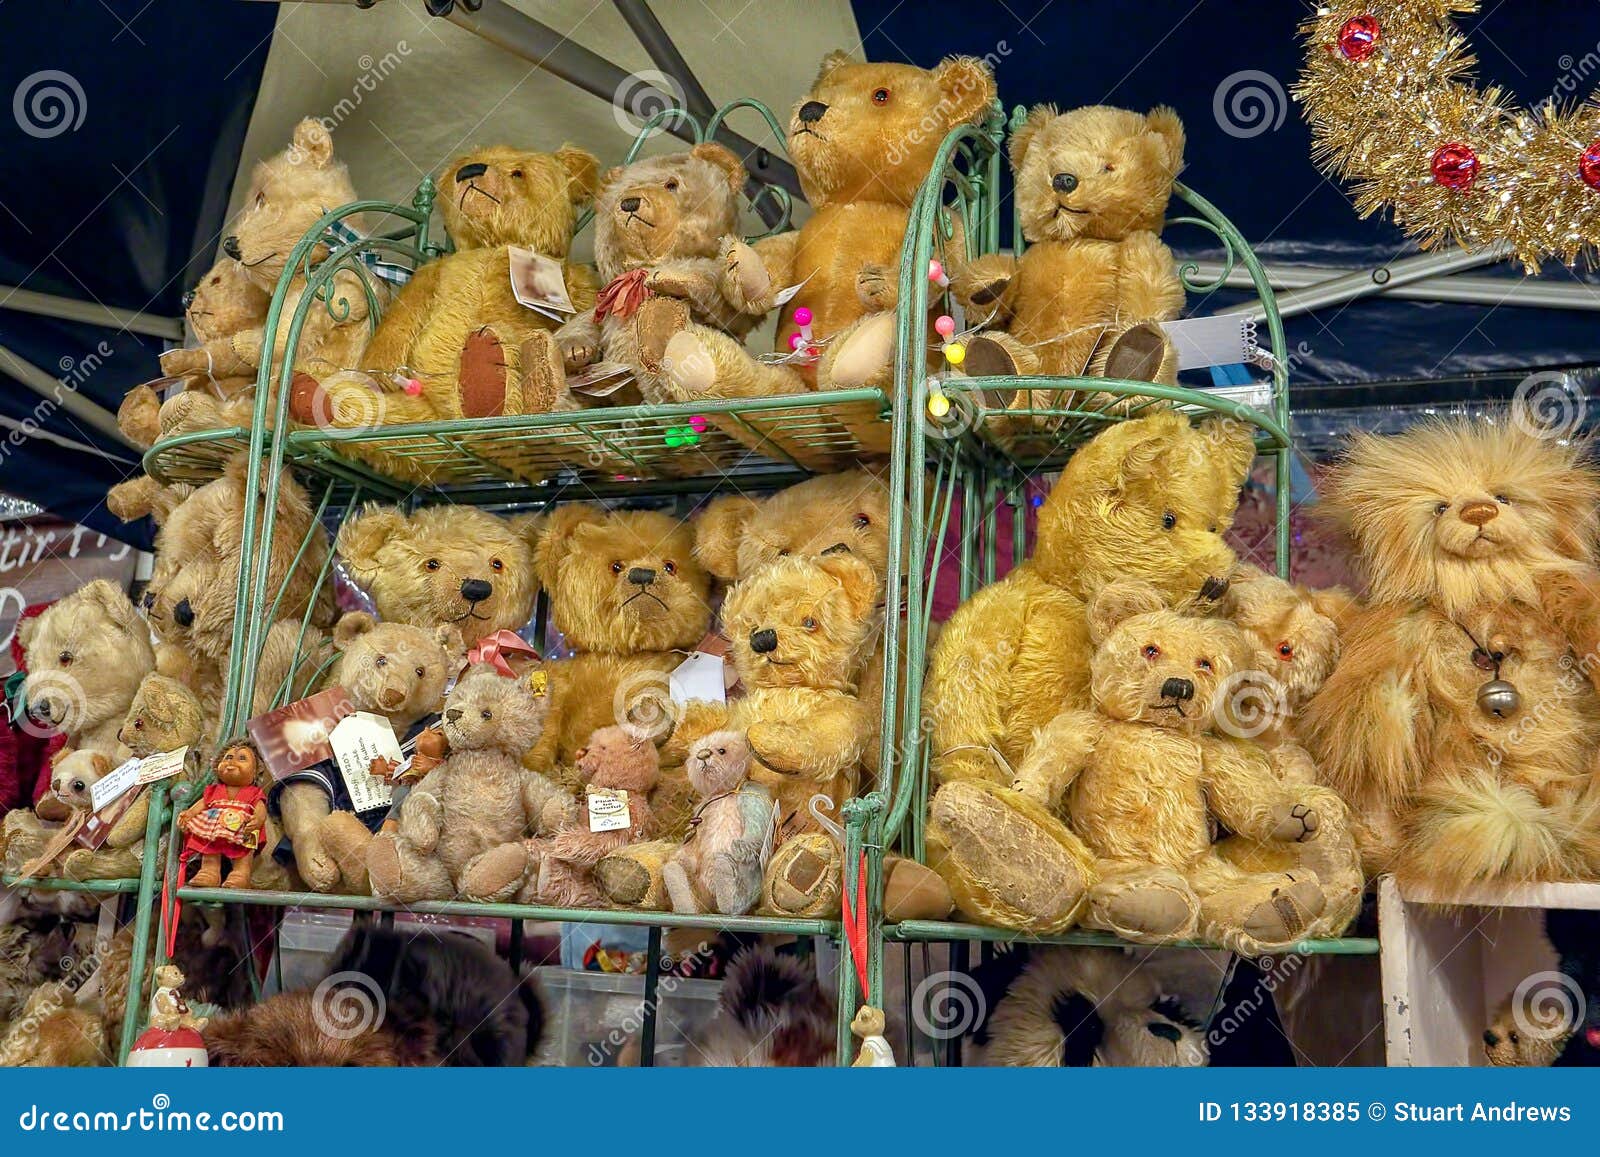 toy bears for sale